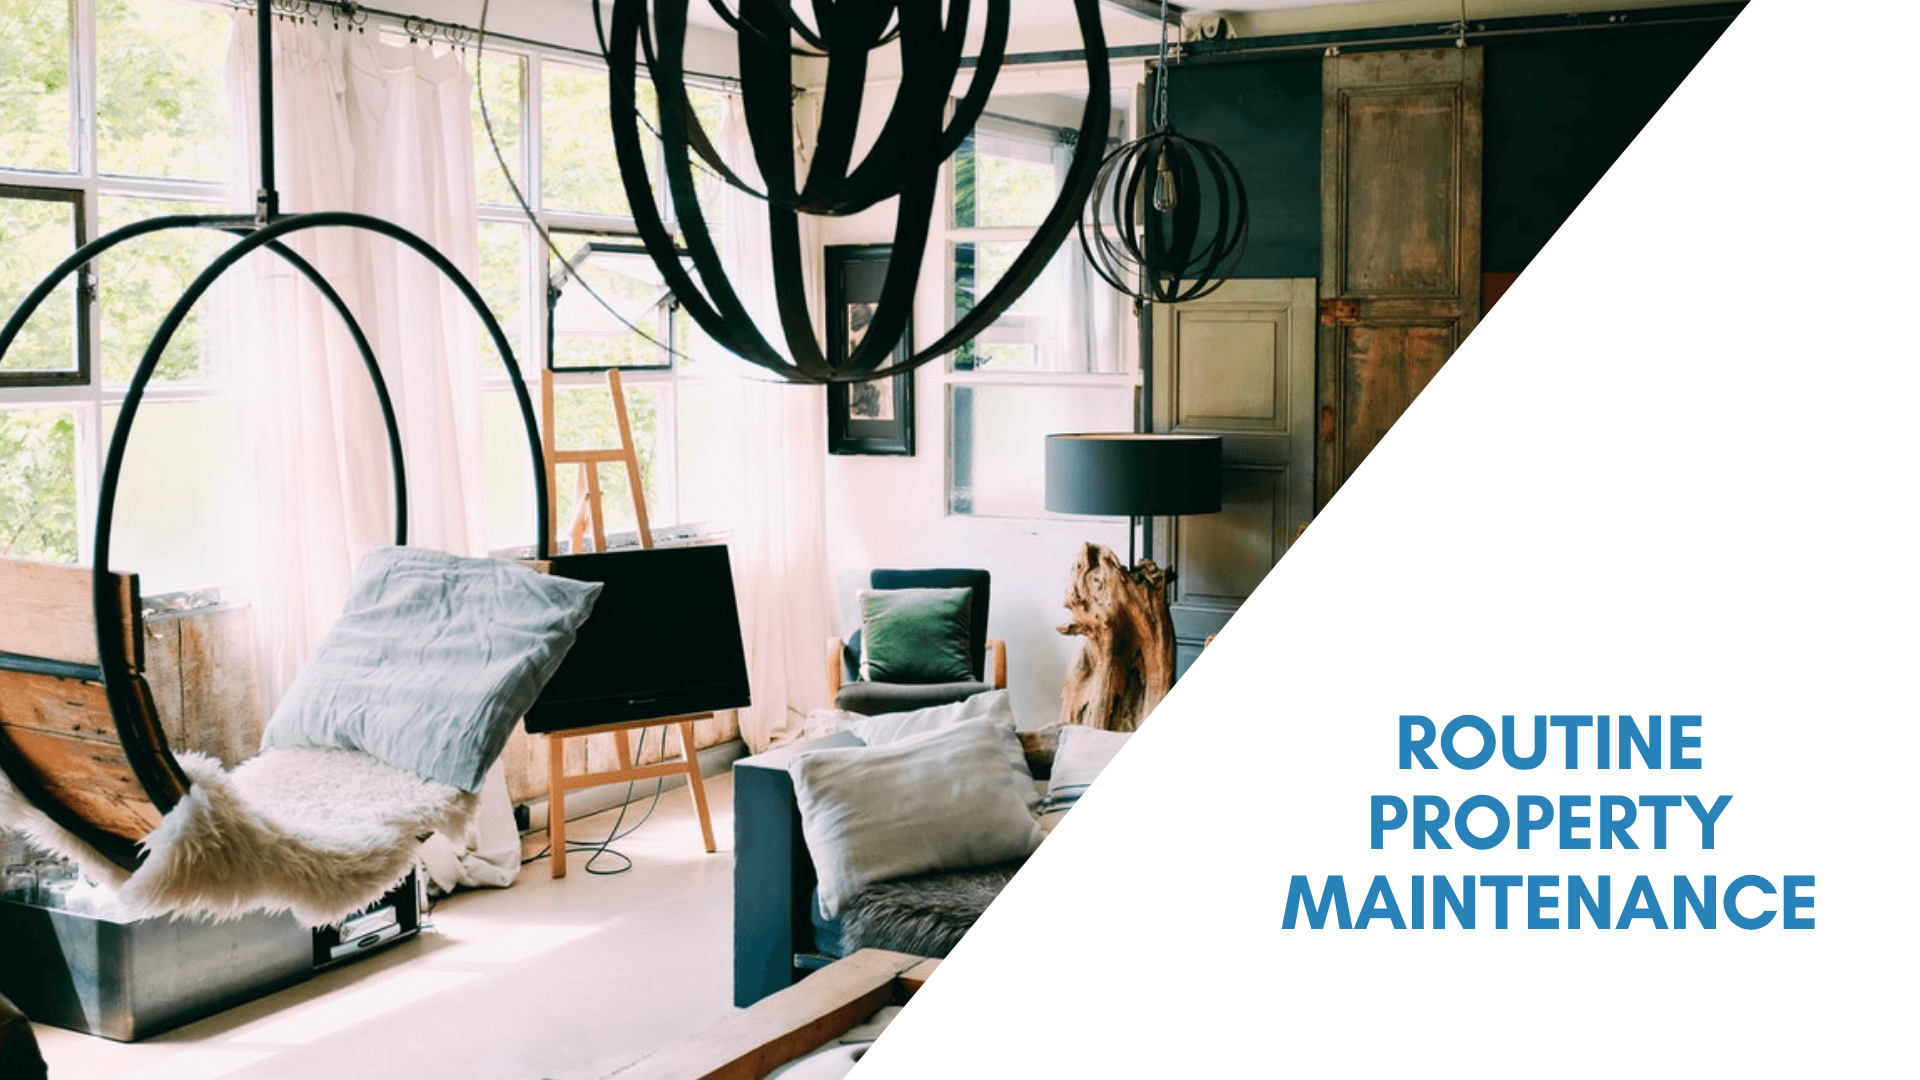 Routine Property Maintenance Protects Your Investment | Killeen Landlord Education